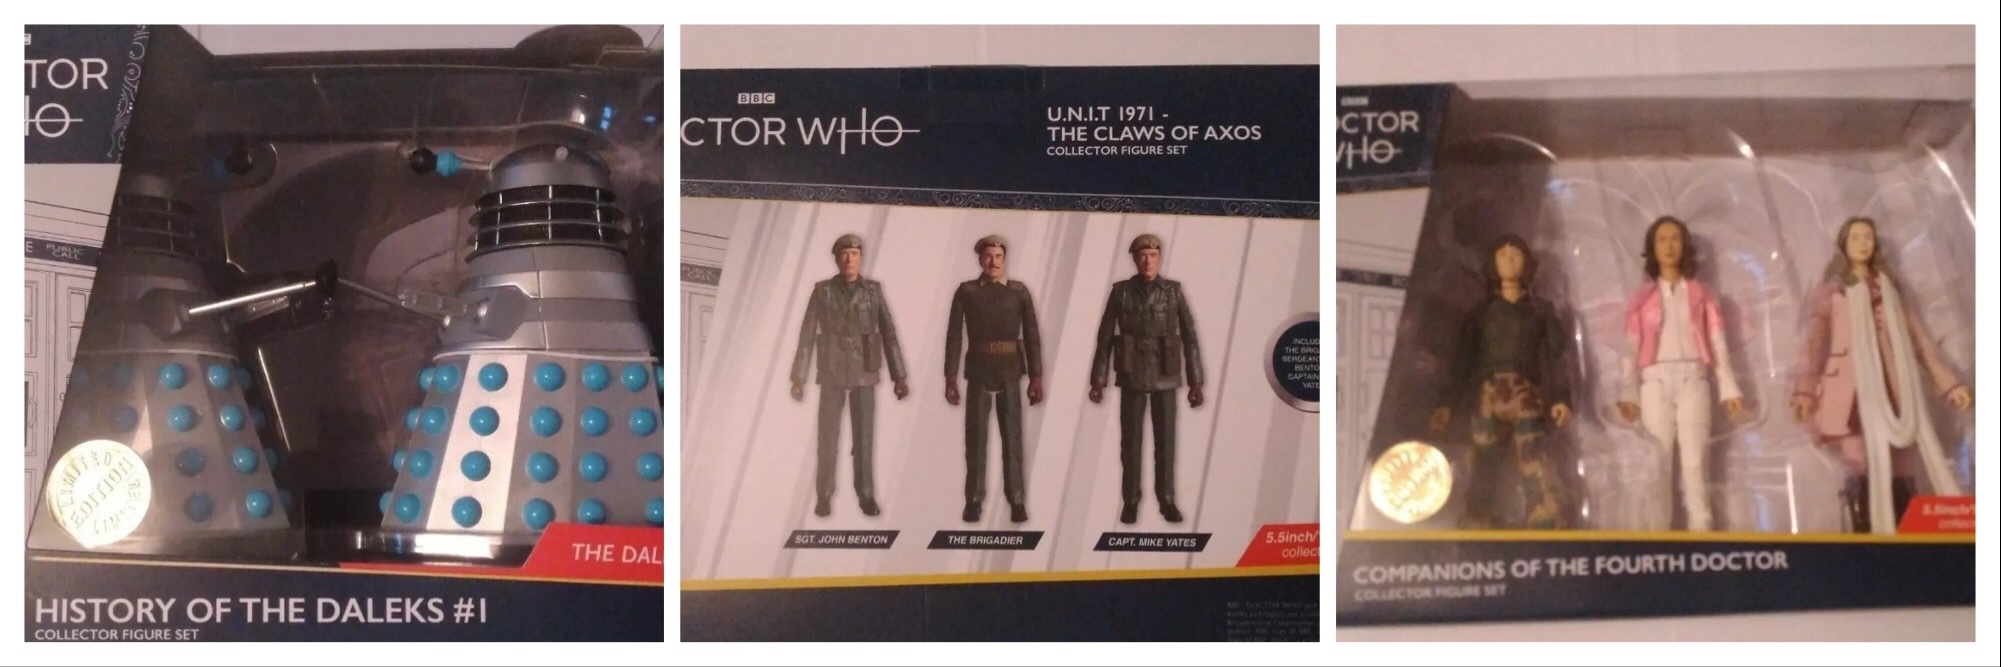 doctor who 5 inch figures